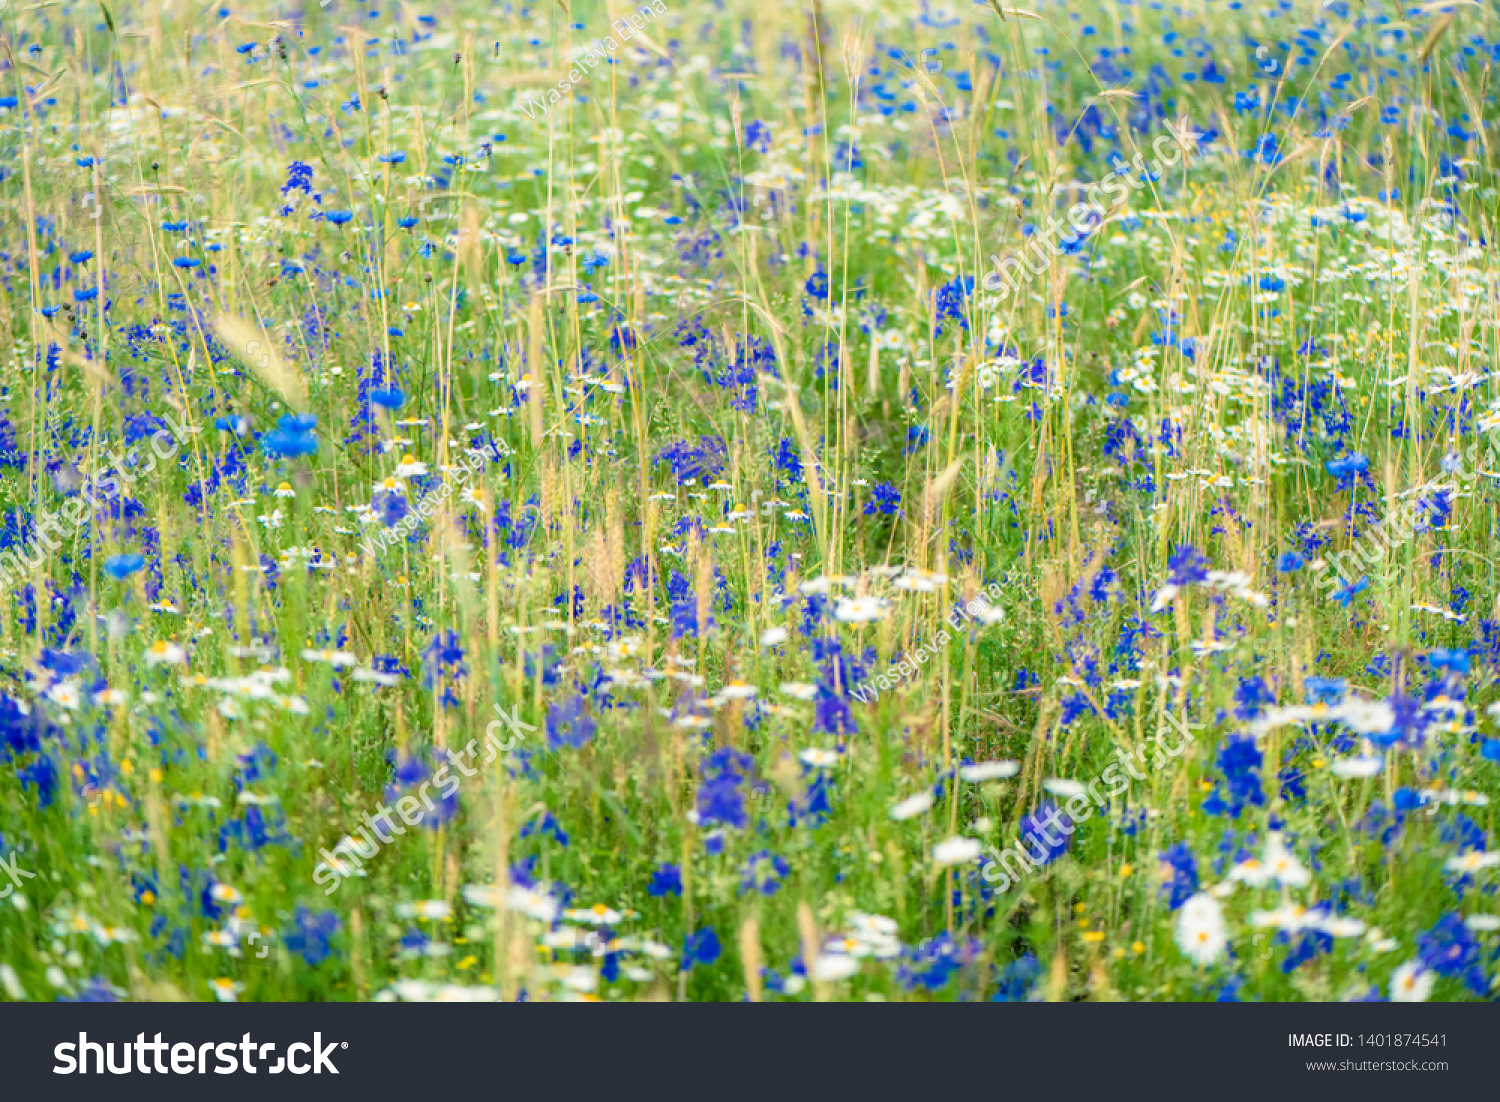 Russian field, summer landscape, cornflowers and chamomiles, ears of wheat. Summer flowers on the meadow. Wildflower meadow, flower meadow, wildflowers #1401874541